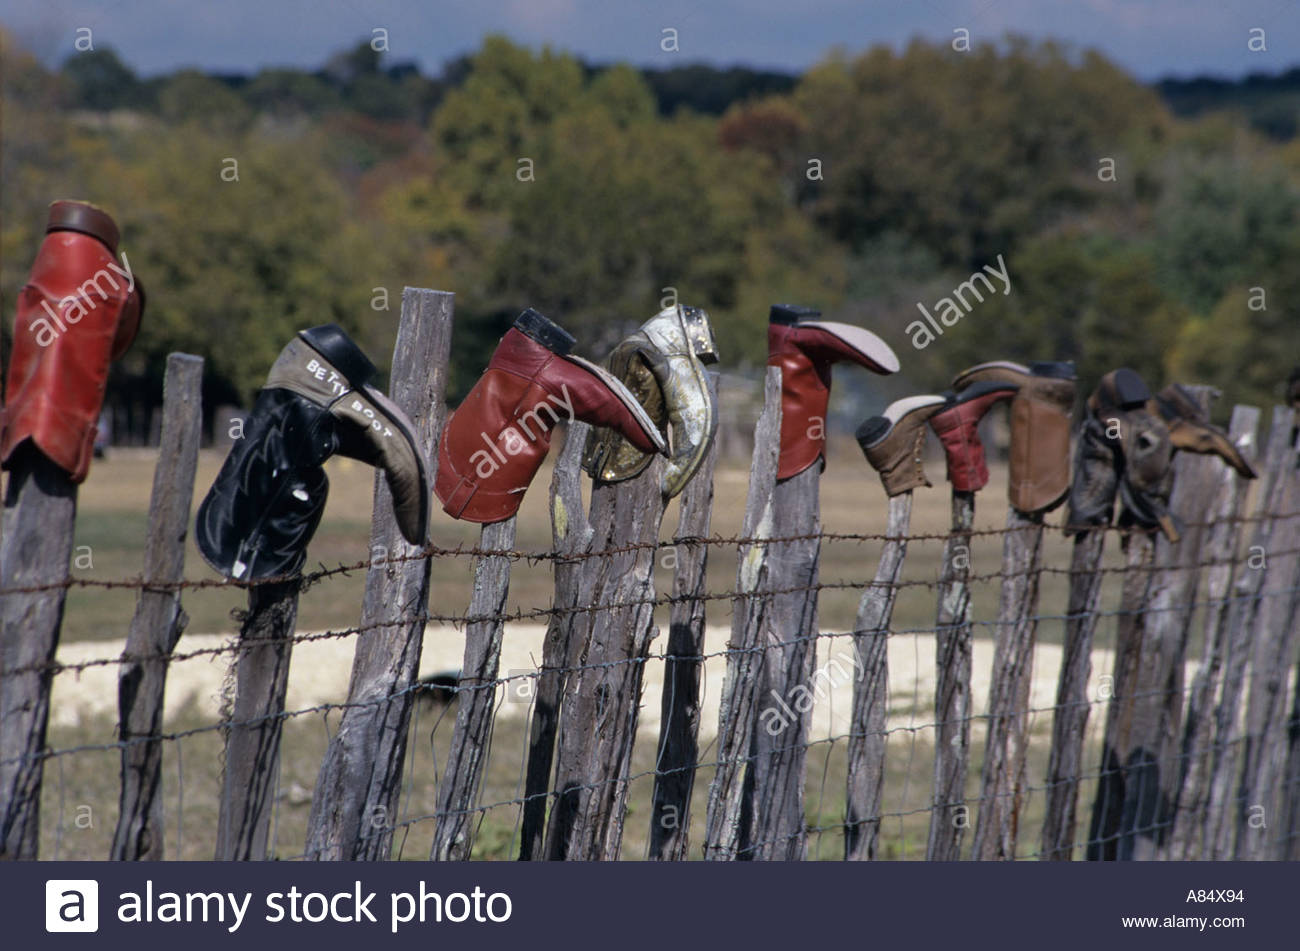 barbed wire cowboy boots